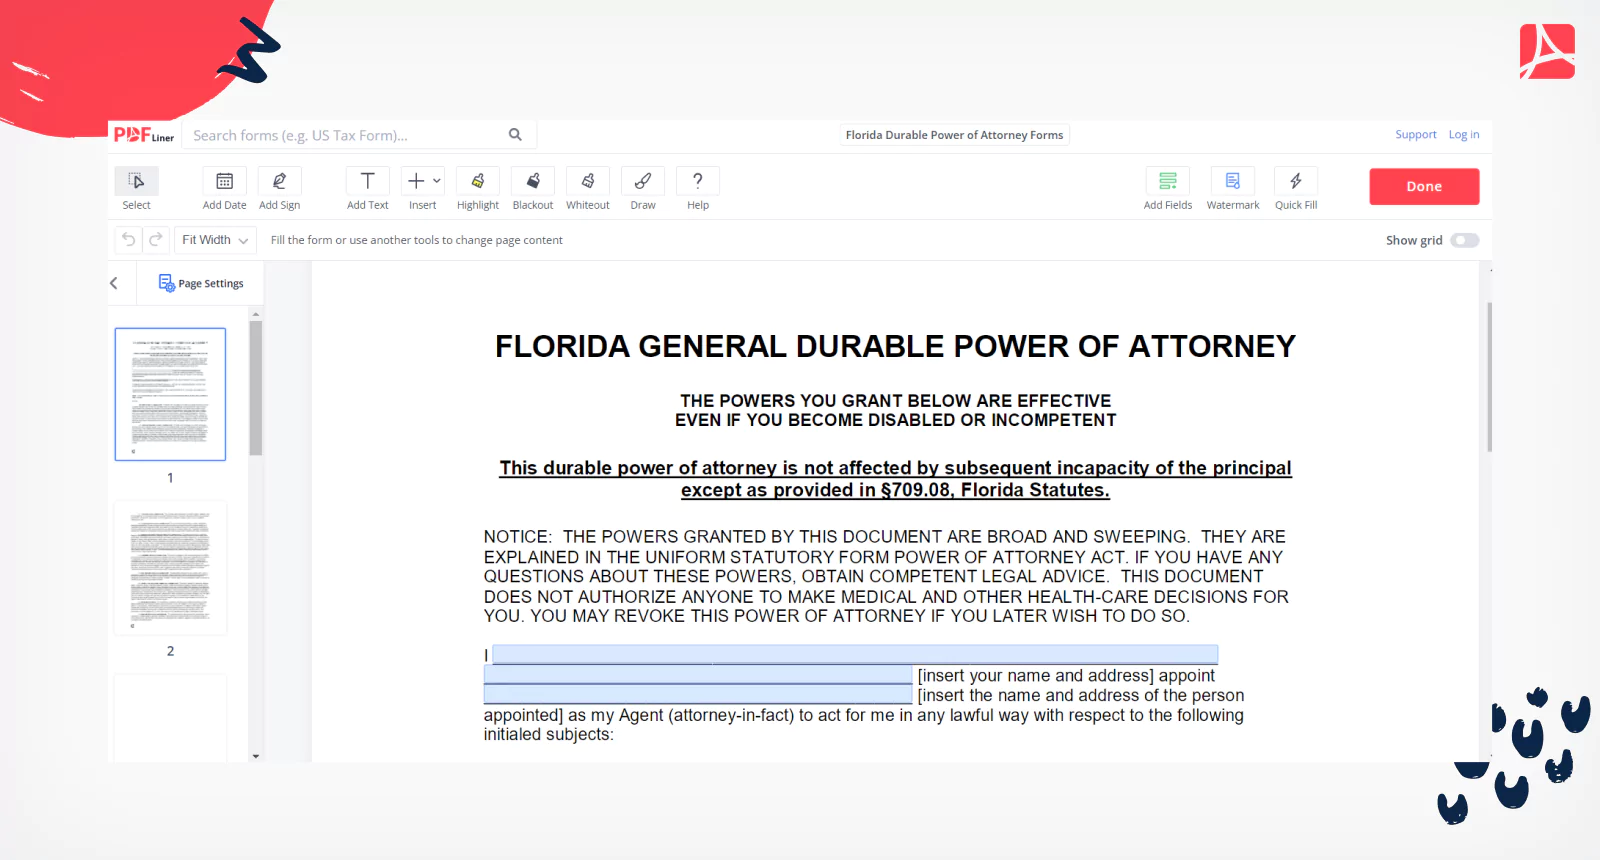 Florida Durable Power of Attorney Forms on PDFLiner